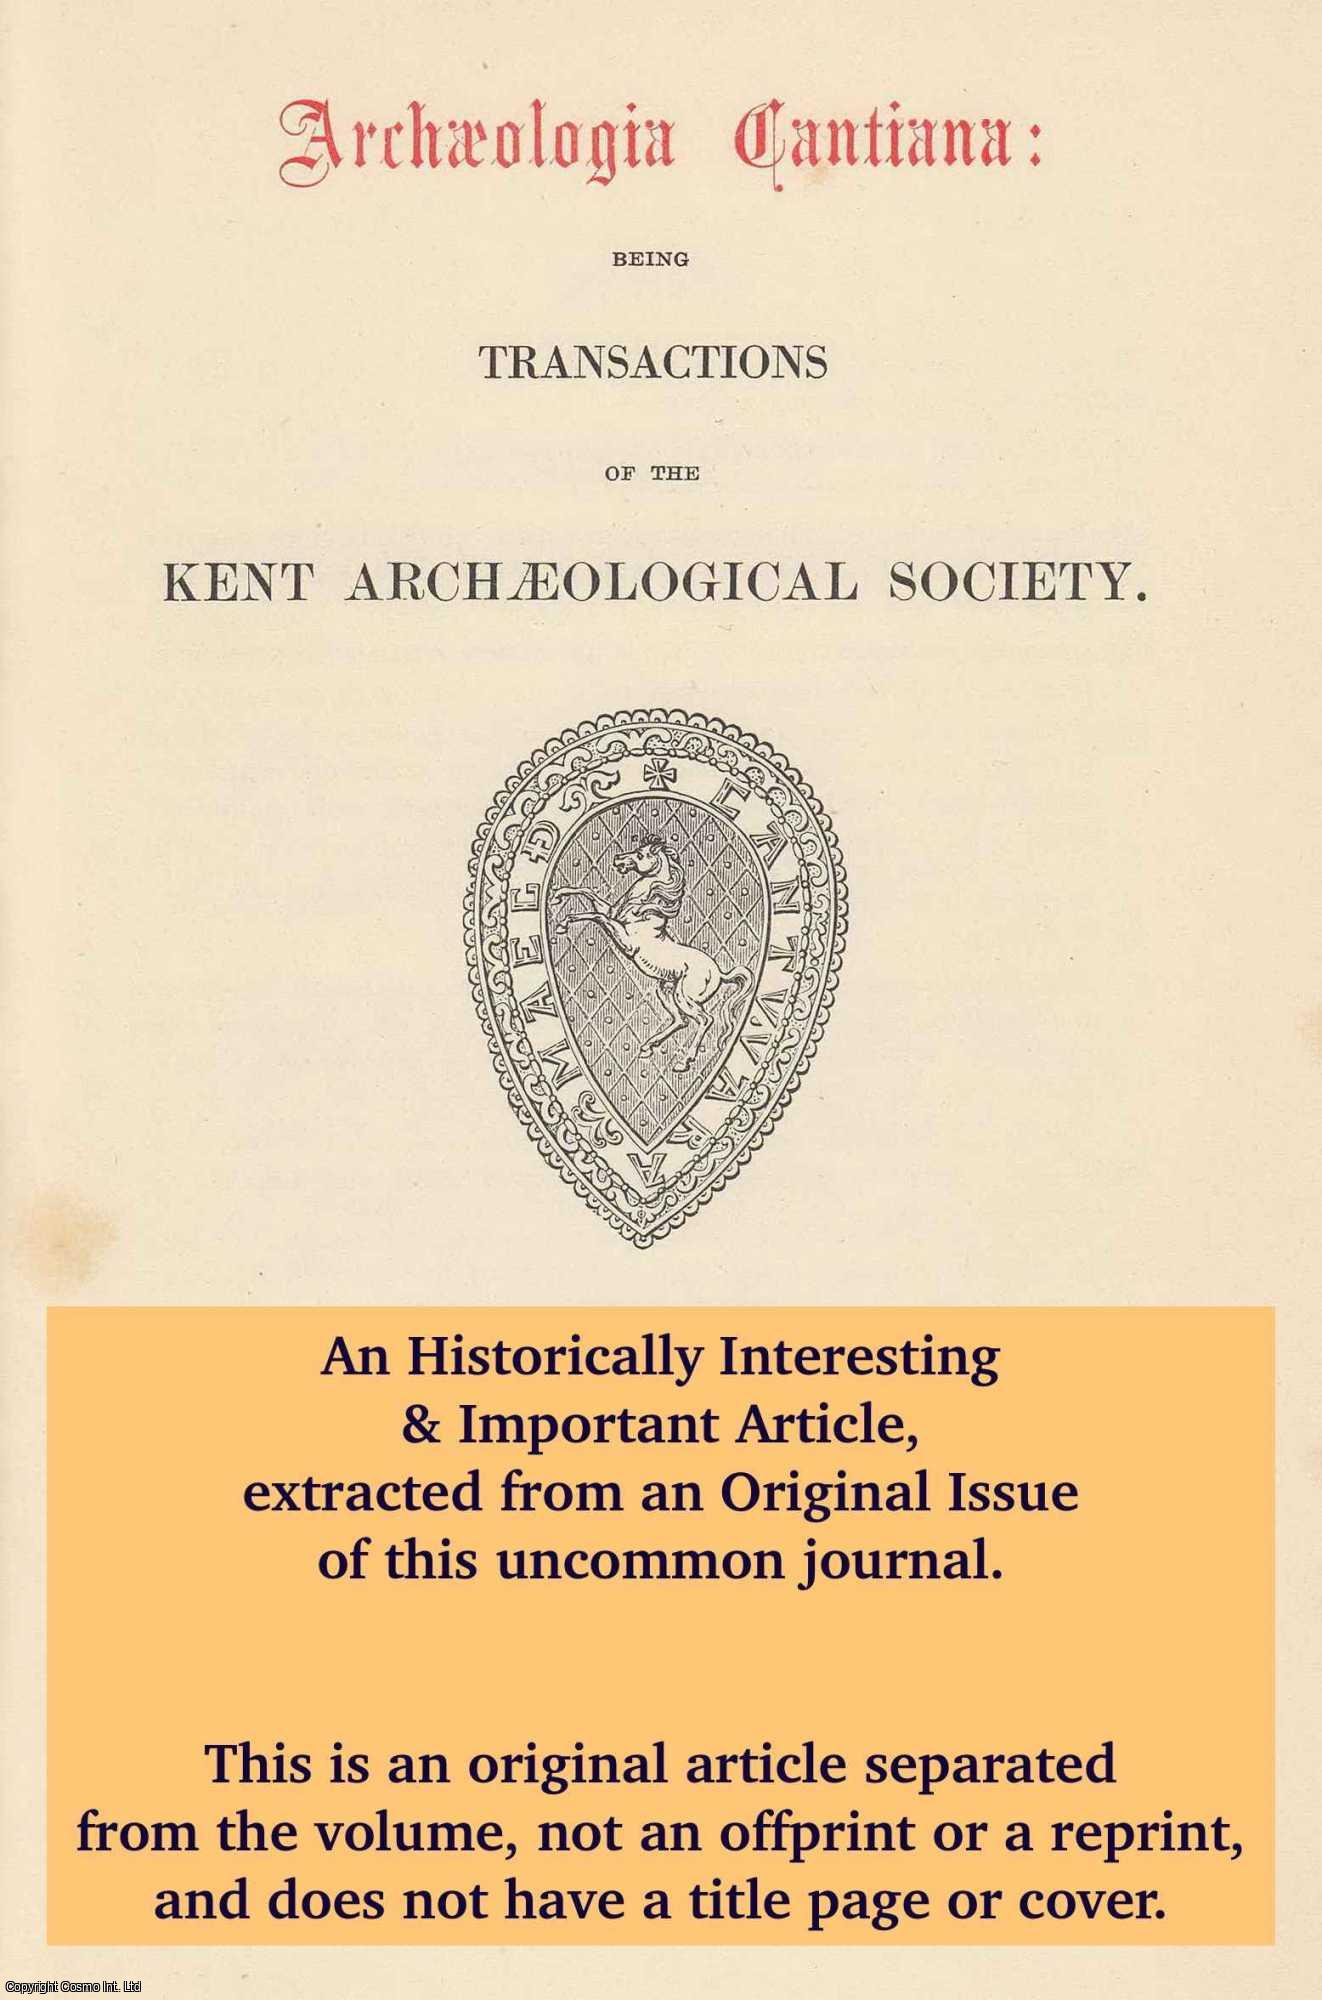 C. L. So - Early Coast Recession around Reculver, Kent. An original article from The Archaeologia Cantiana, 1972.